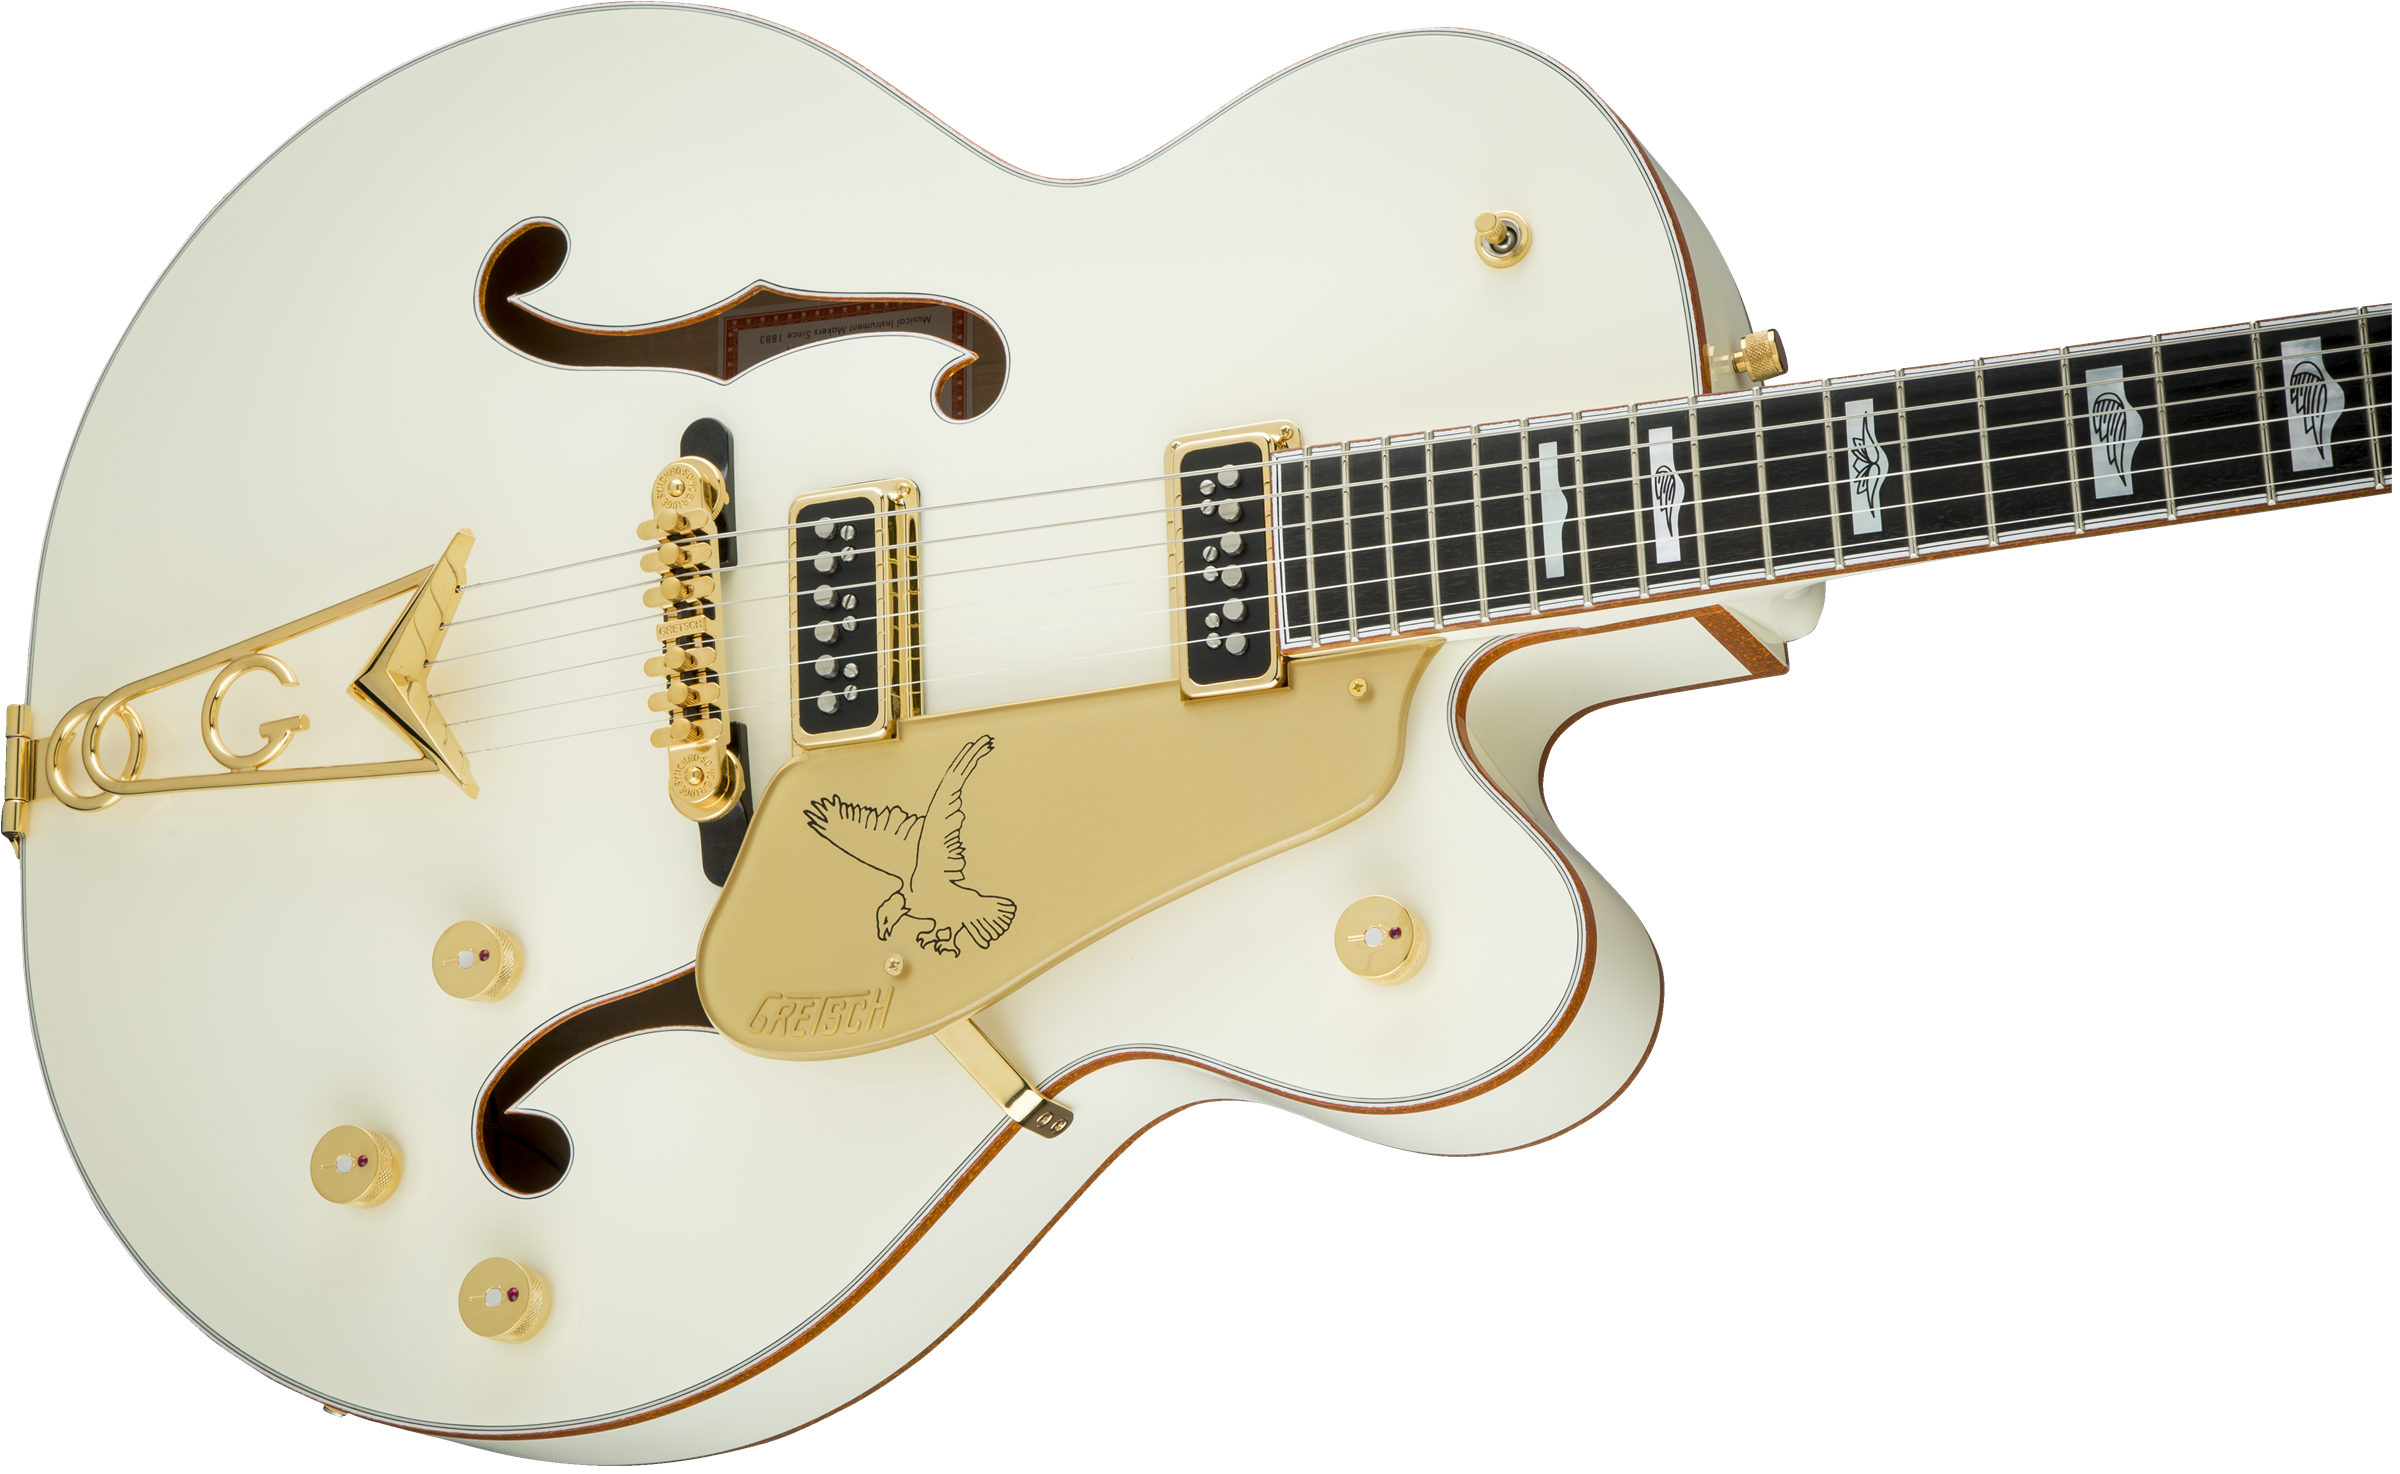 Gretsch G6136-55 G6136-55 Vintage Select Edition '55 Falcon™ Hollow Body with Cadillac Tailpiece, TV Jones®, Solid Spruce Top, Vintage White, Lacquer MODEL #: 2411510805